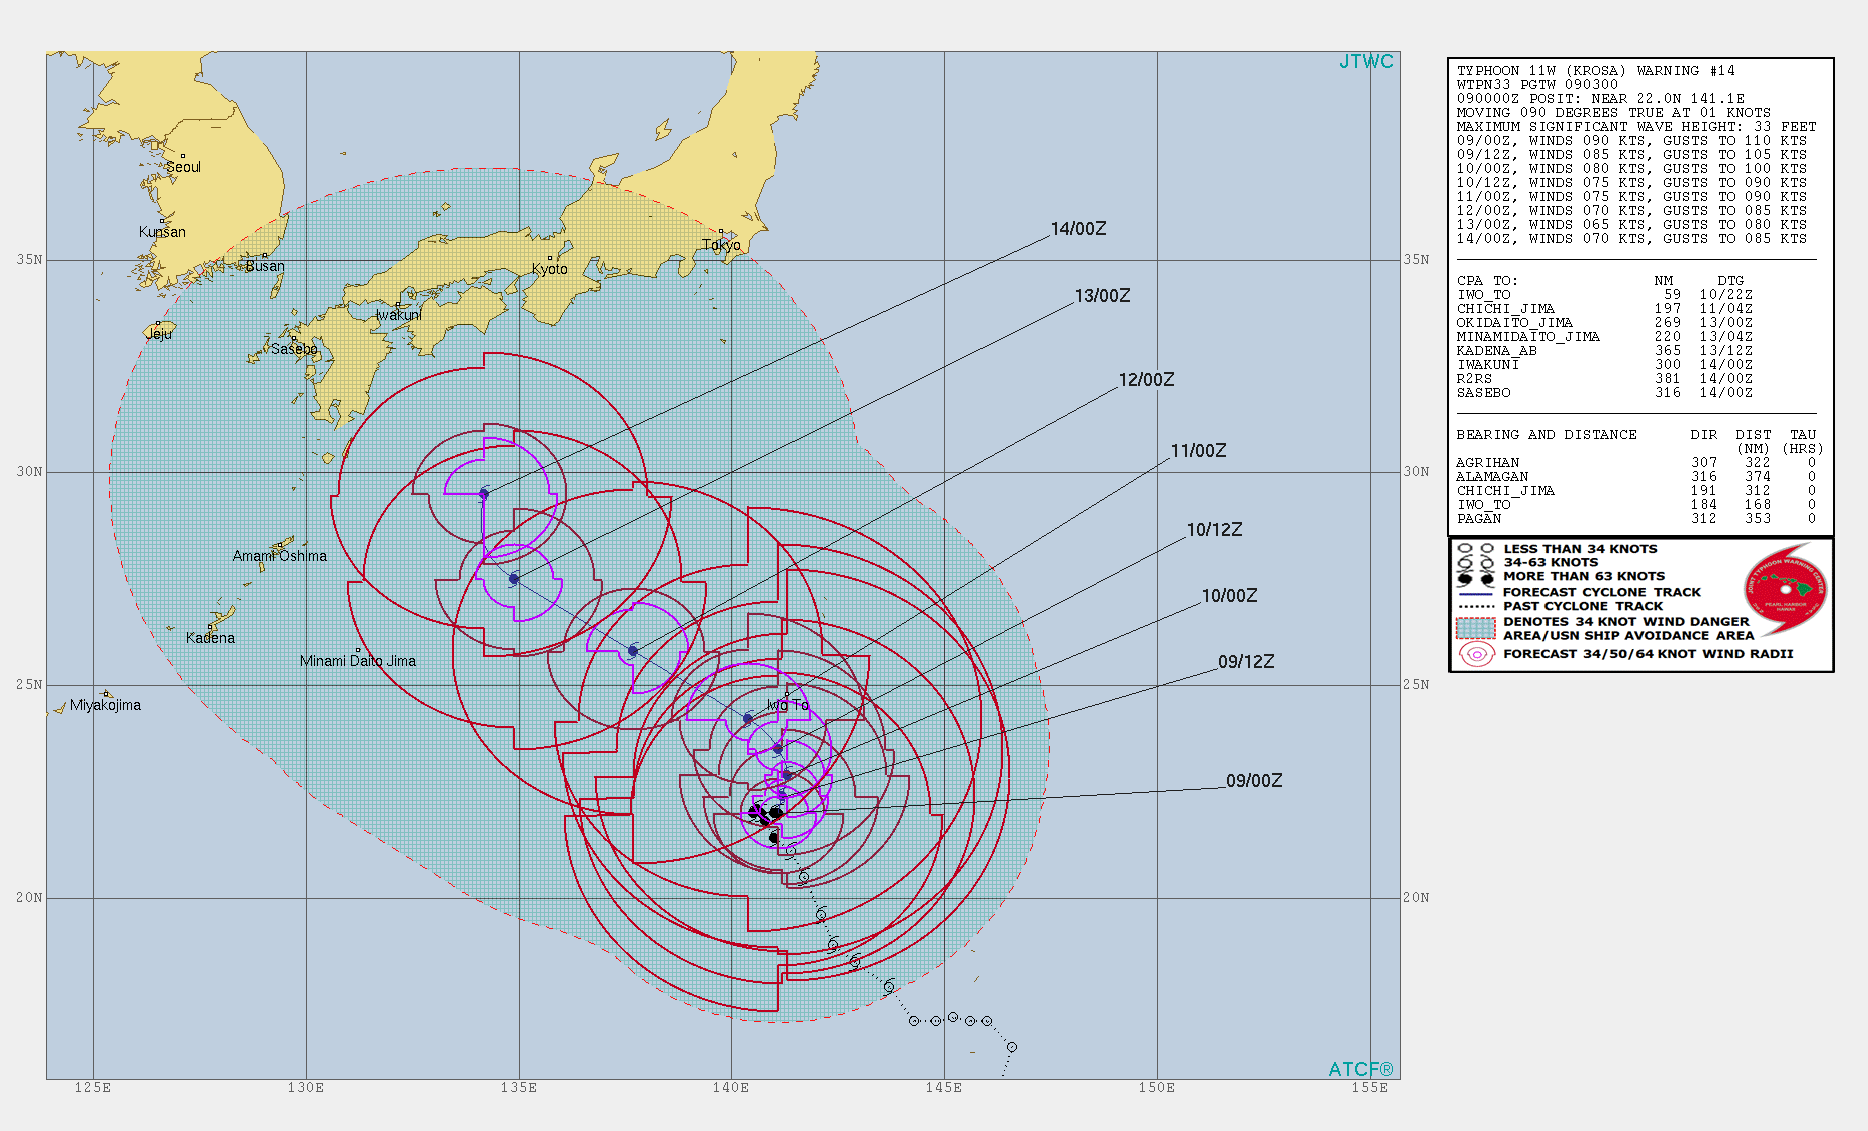 KROSA(11W): WARNING 14: INTENSITY IS FORECAST TO DECREASE GRADUALLY NEXT 72H BUT COULD BE SLIGHTLY UP ONCE AGAIN WHEN THE CYCLONE APPORACHES SOUTHERN JAPAN